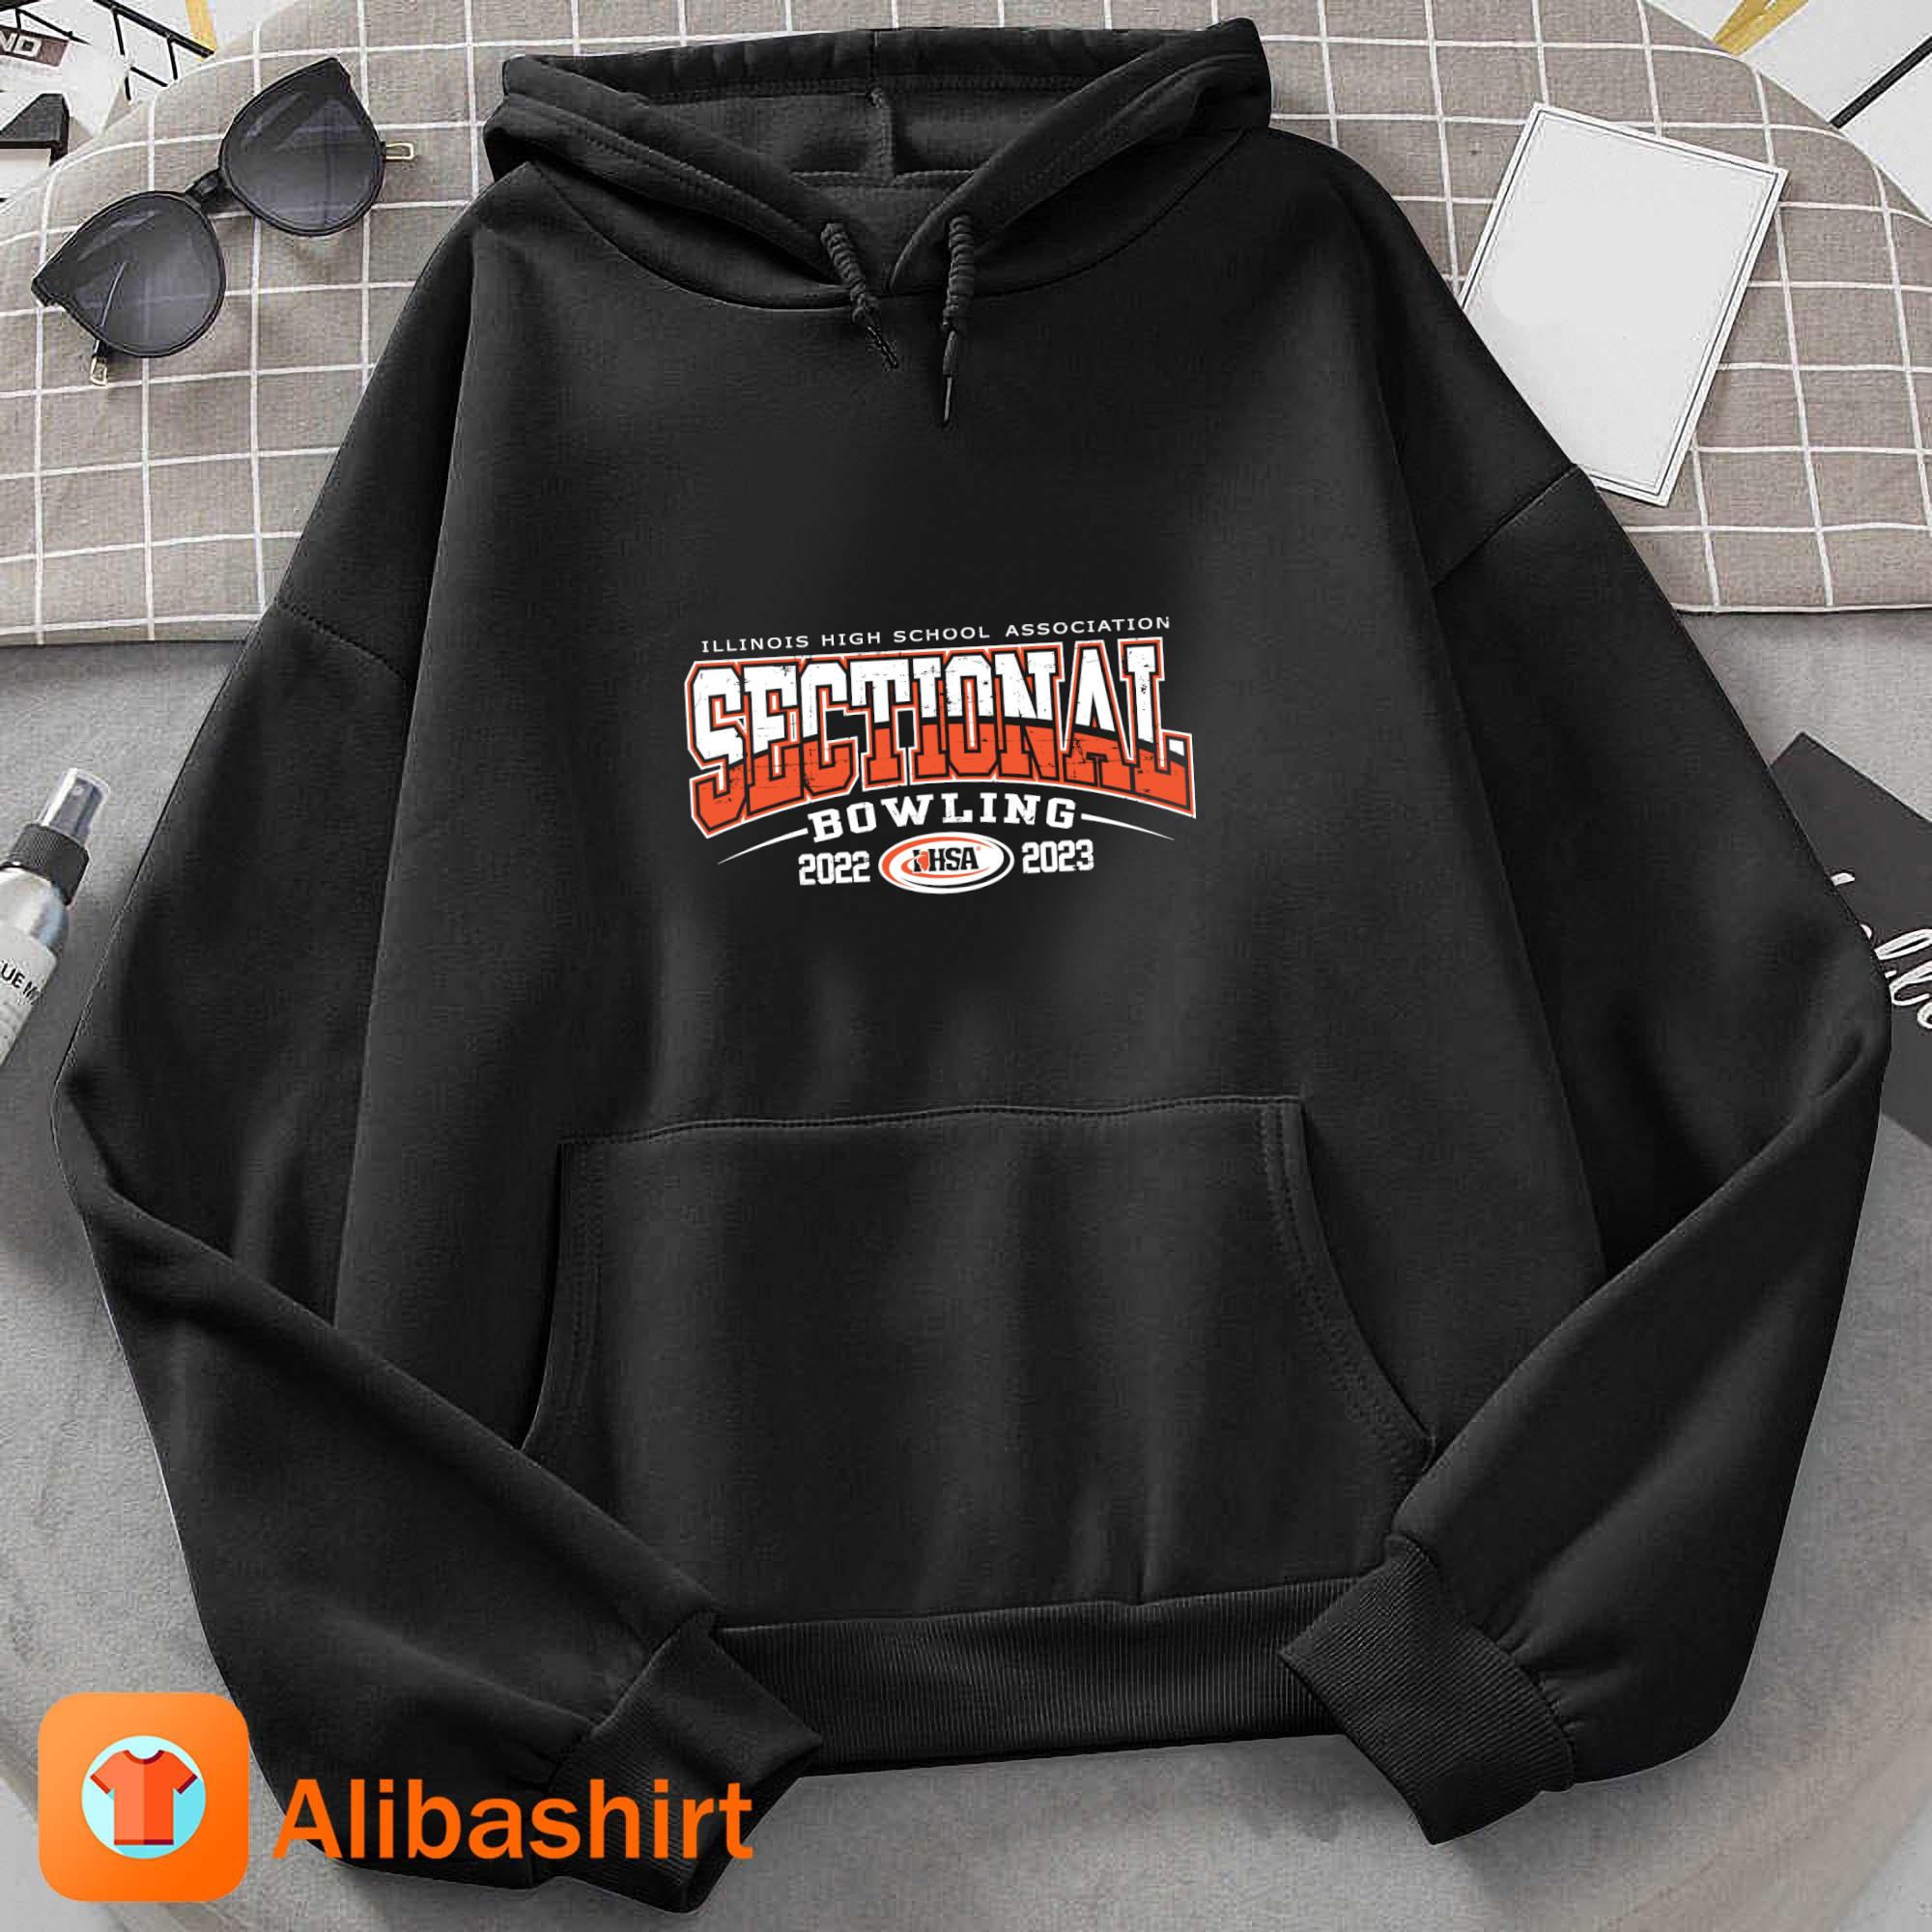 Illinois High School Association Sectional Bowling 2022 2023 s Hoodie